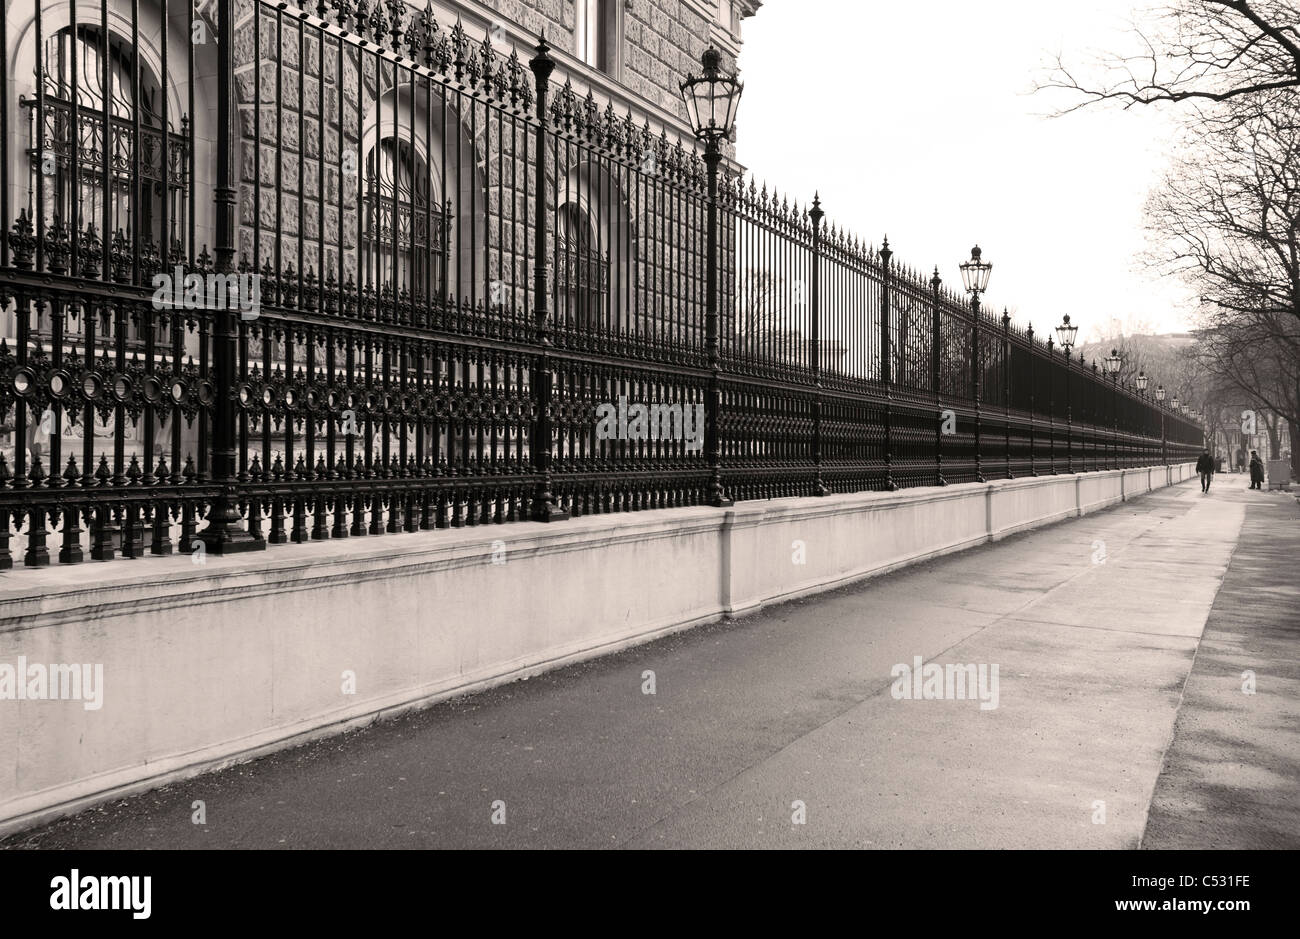 Railings down the side of the Hofburg palace. Vienna, Austria. Stock Photo